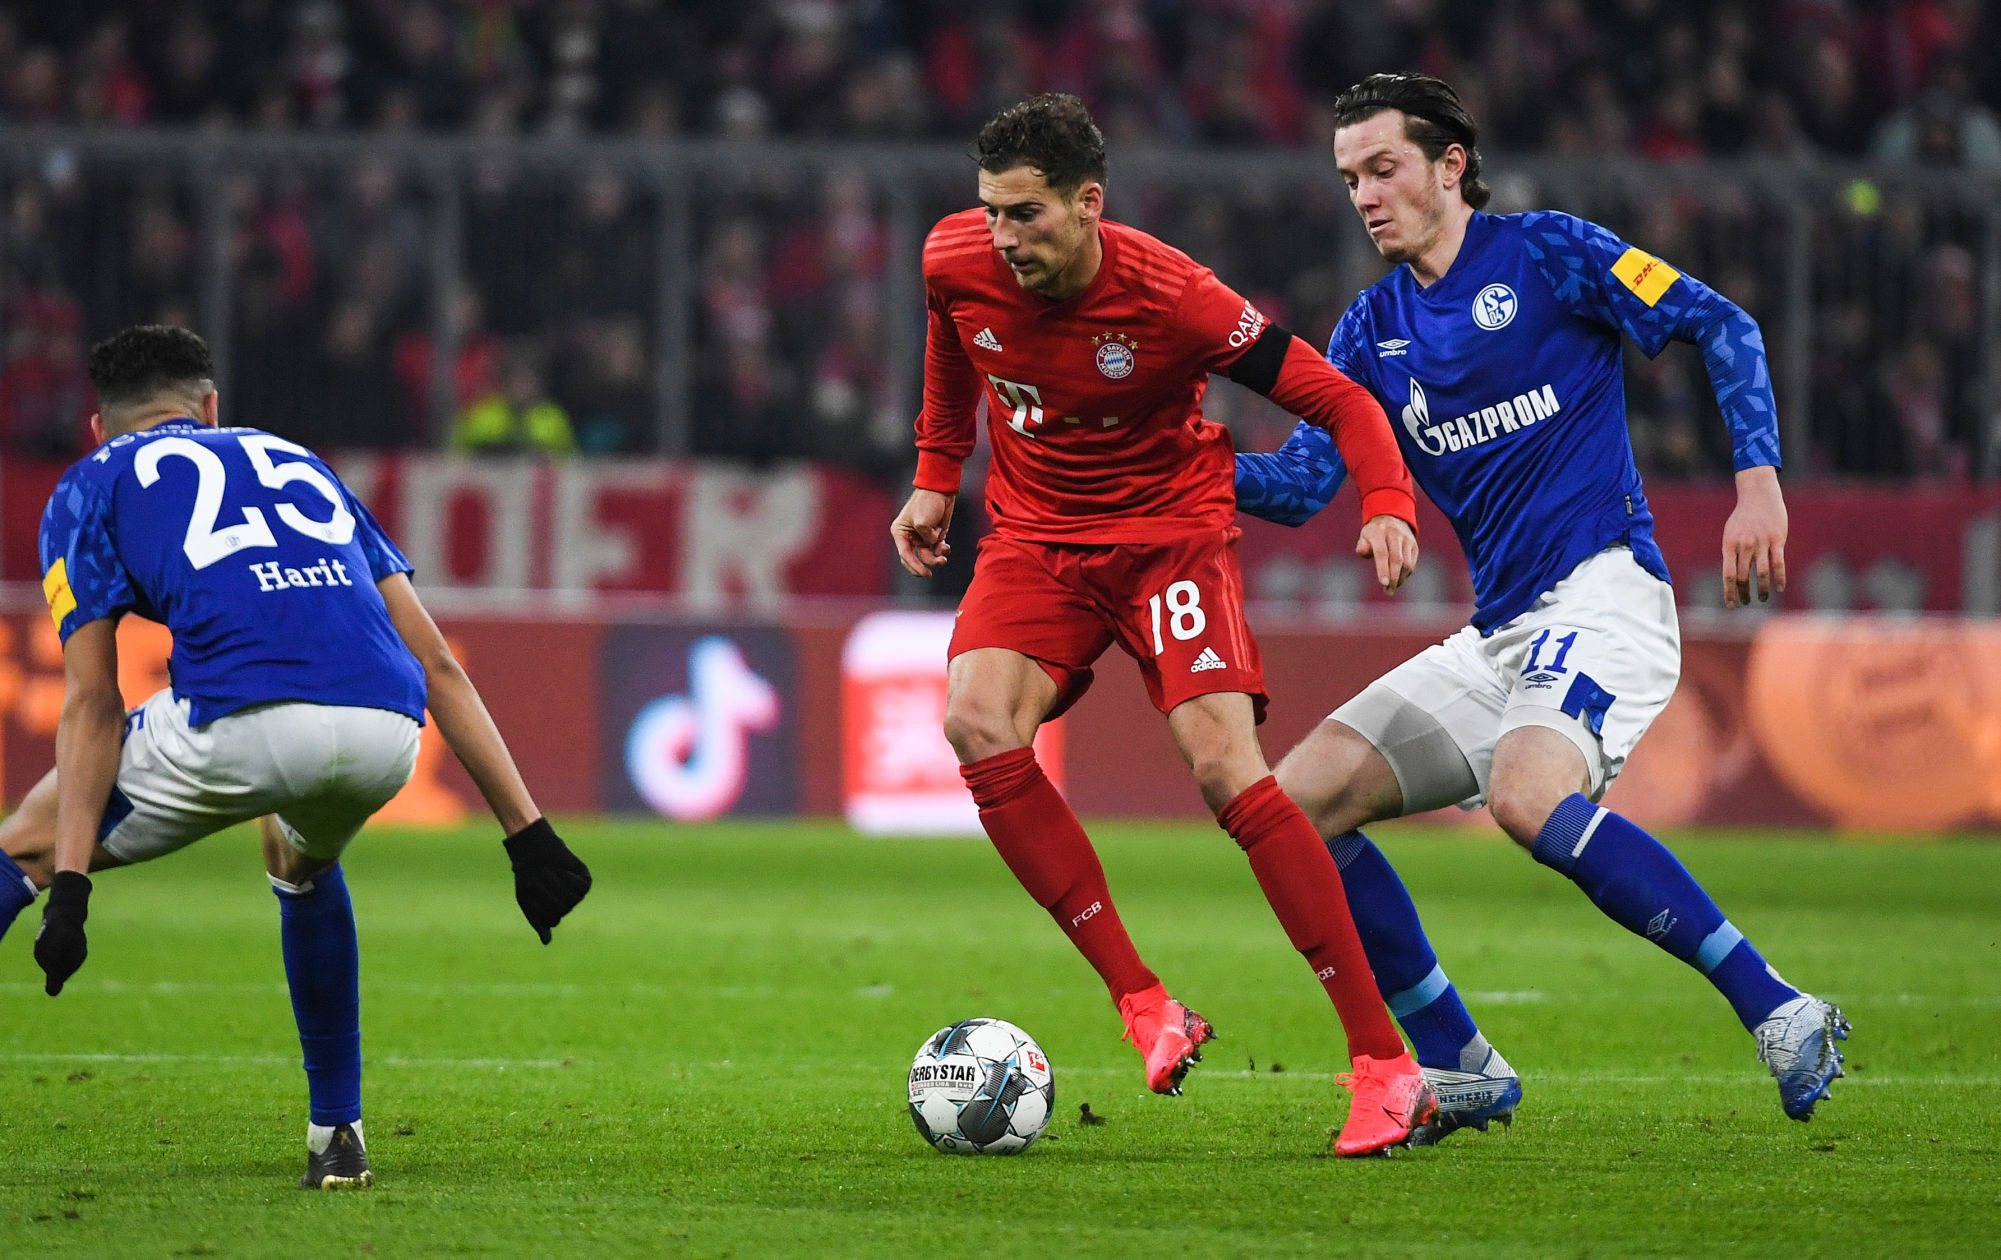 25 January 2020, Bavaria, Munich: Football: Bundesliga, Bayern Munich - FC Schalke 04, 19th matchday. Bavaria's Leon Goretzka (M) fights for the ball against Schalkes Amine Harit (l) and Michael Gregoritsch. Photo: Angelika Warmuth/dpa - IMPORTANT NOTE: In accordance with the regulations of the DFL Deutsche Fu?ball Liga and the DFB Deutscher Fu?ball-Bund, it is prohibited to exploit or have exploited in the stadium and/or from the game taken photographs in the form of sequence images and/or video-like photo series. 

Photo by Icon Sport - Allianz Arena - Munich (Allemagne)